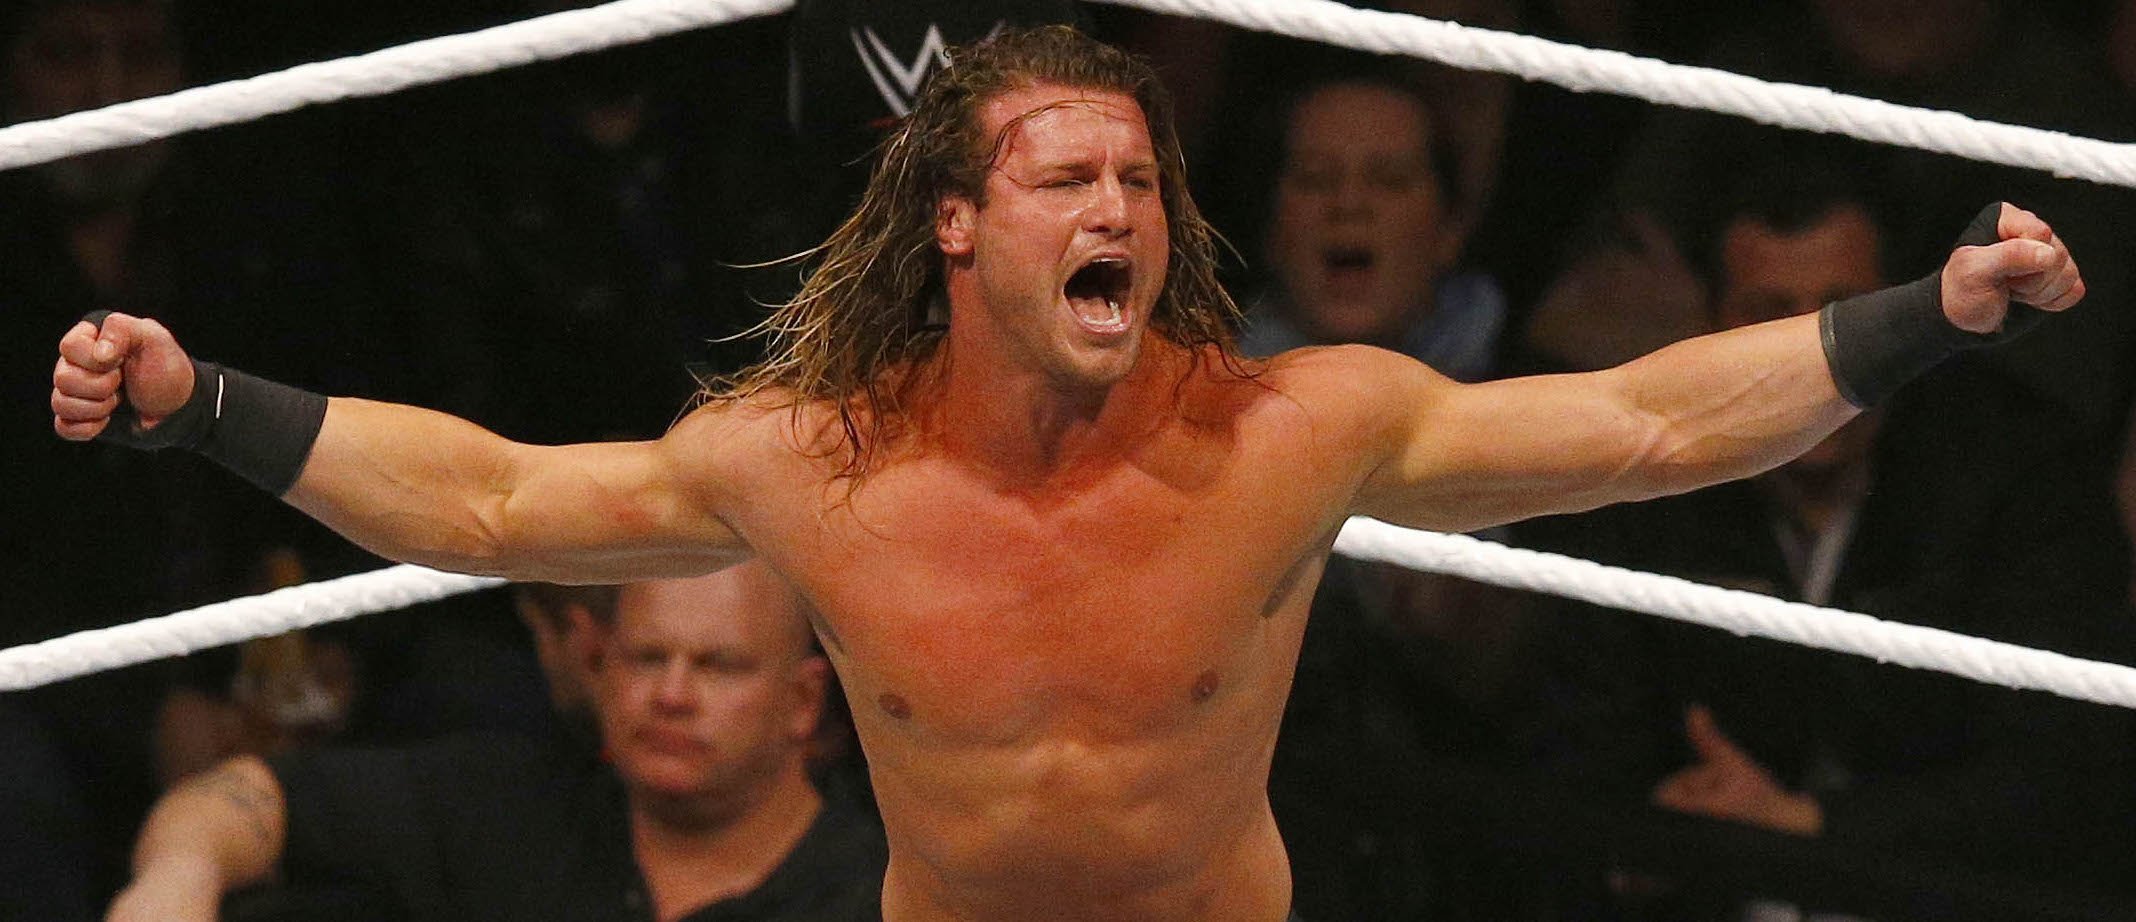 Updates On Dolph Ziggler, His WWE Return & Possible Future Plans